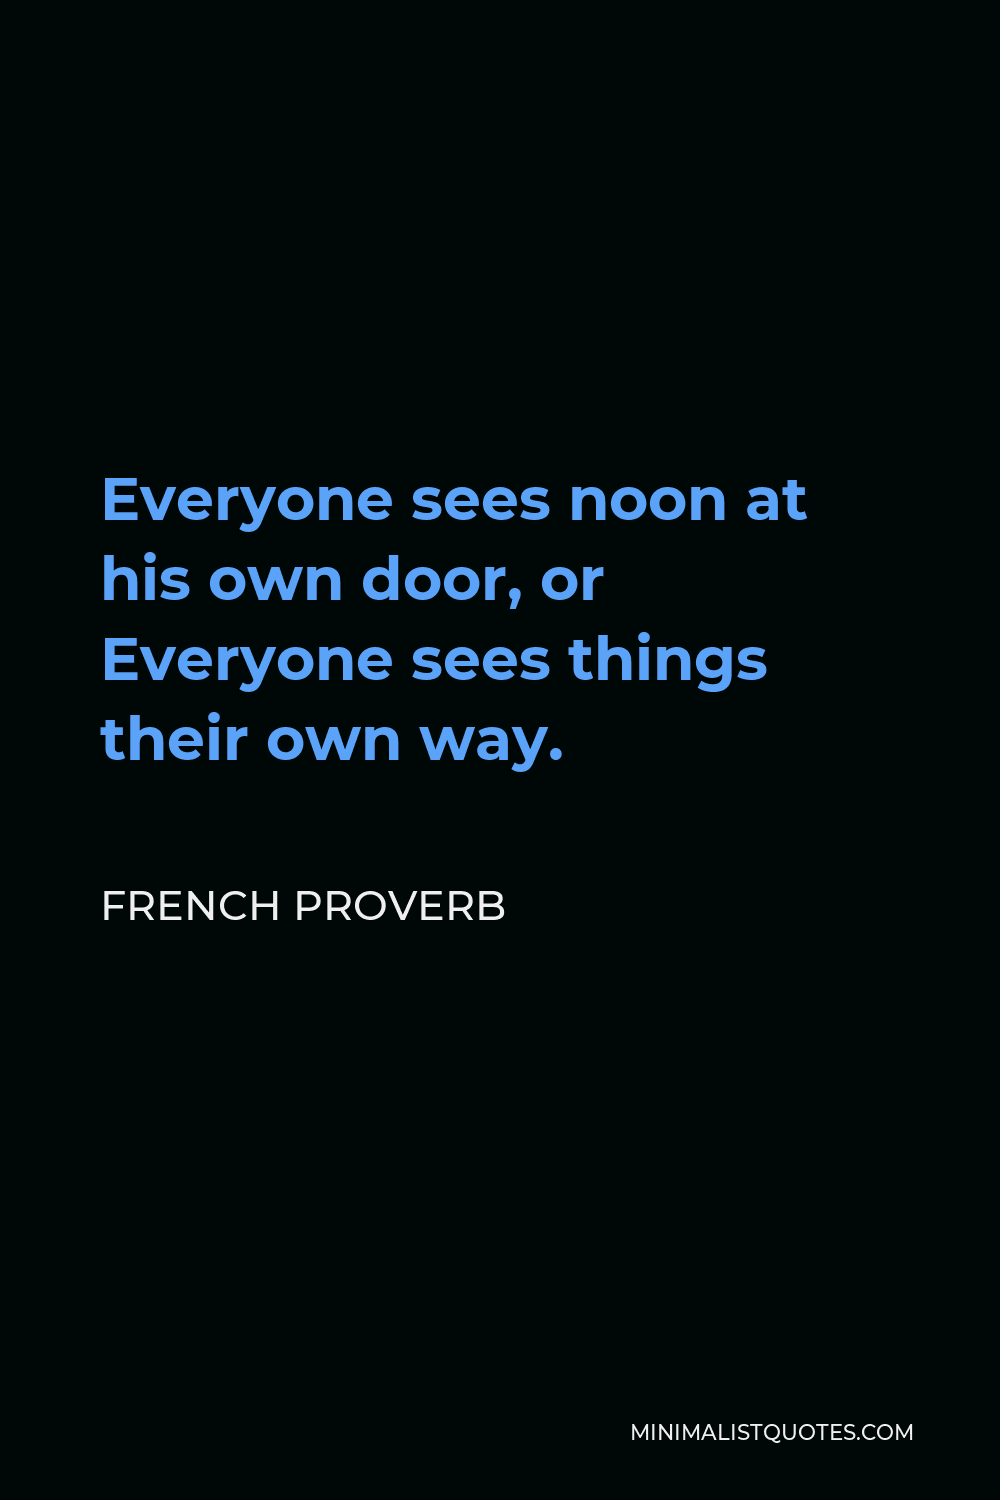 French Proverb Quote - Everyone sees noon at his own door, or Everyone sees things their own way.